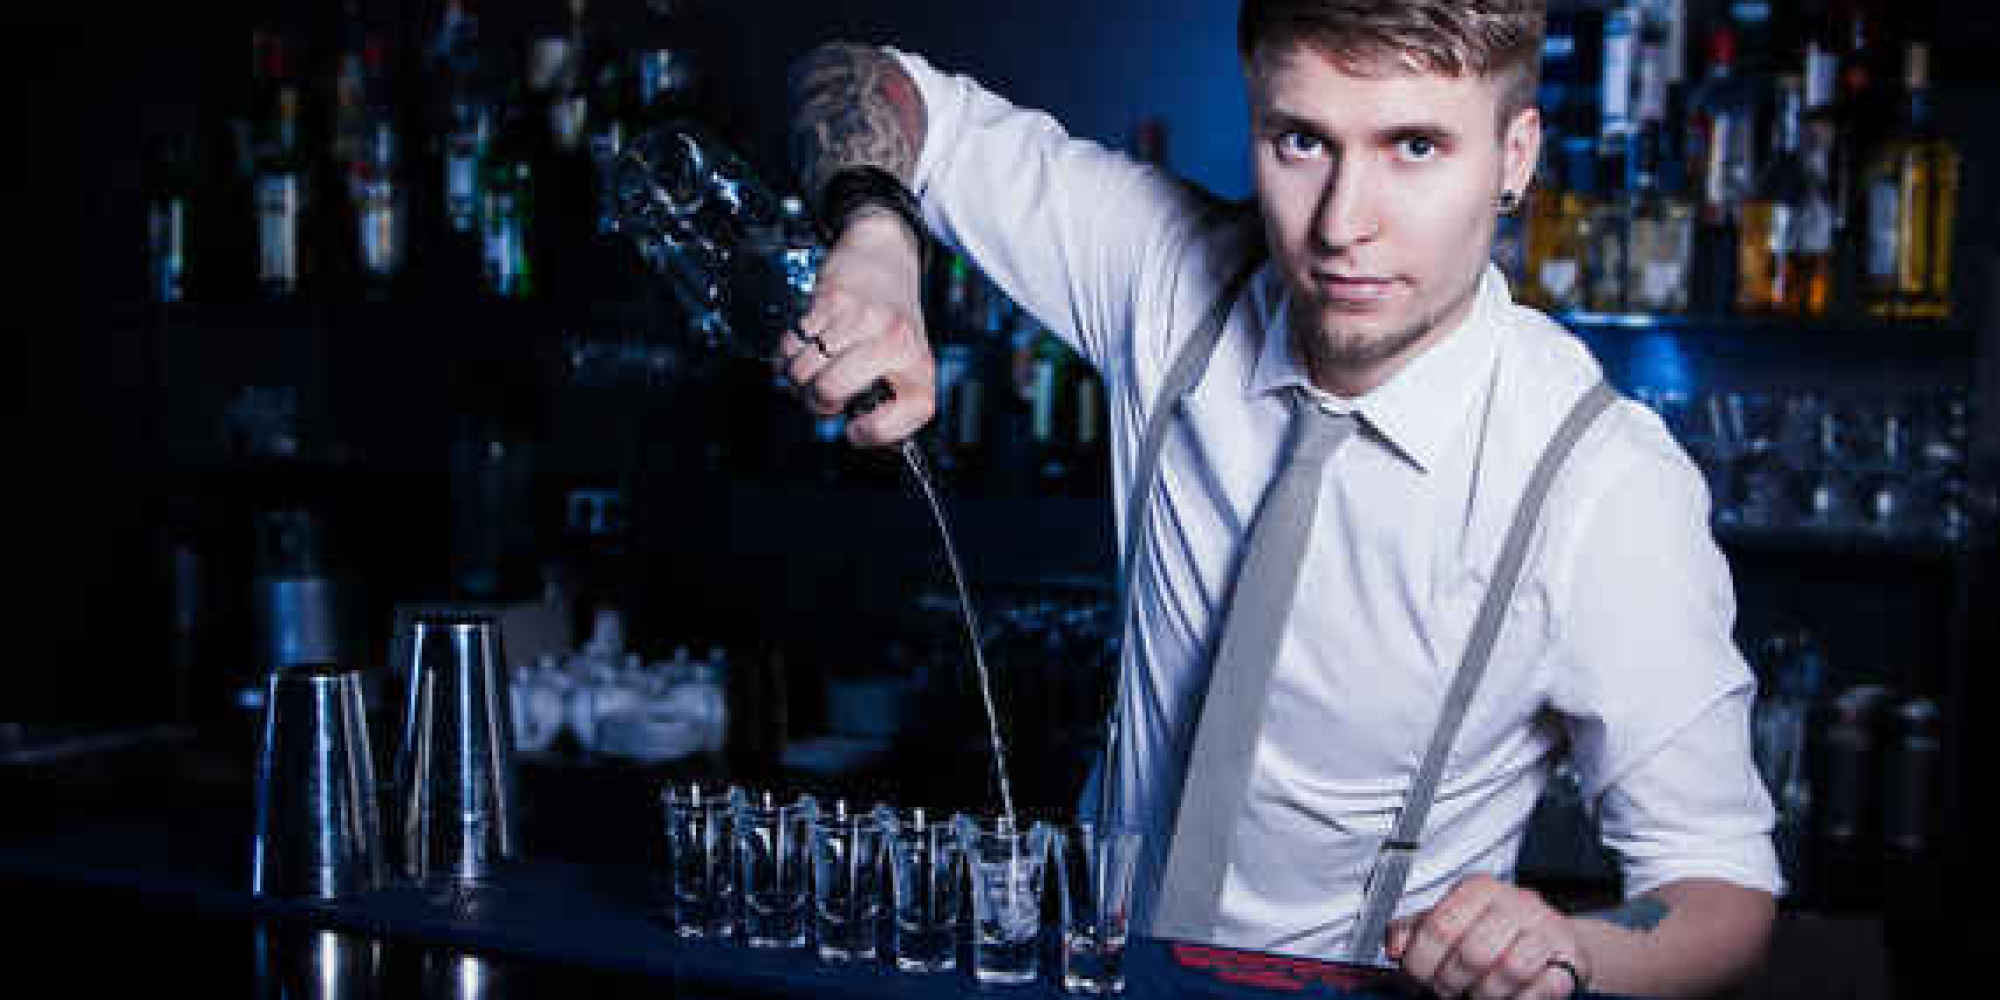 The Best Ways To Get Bartenders' Attention, According To Bartenders